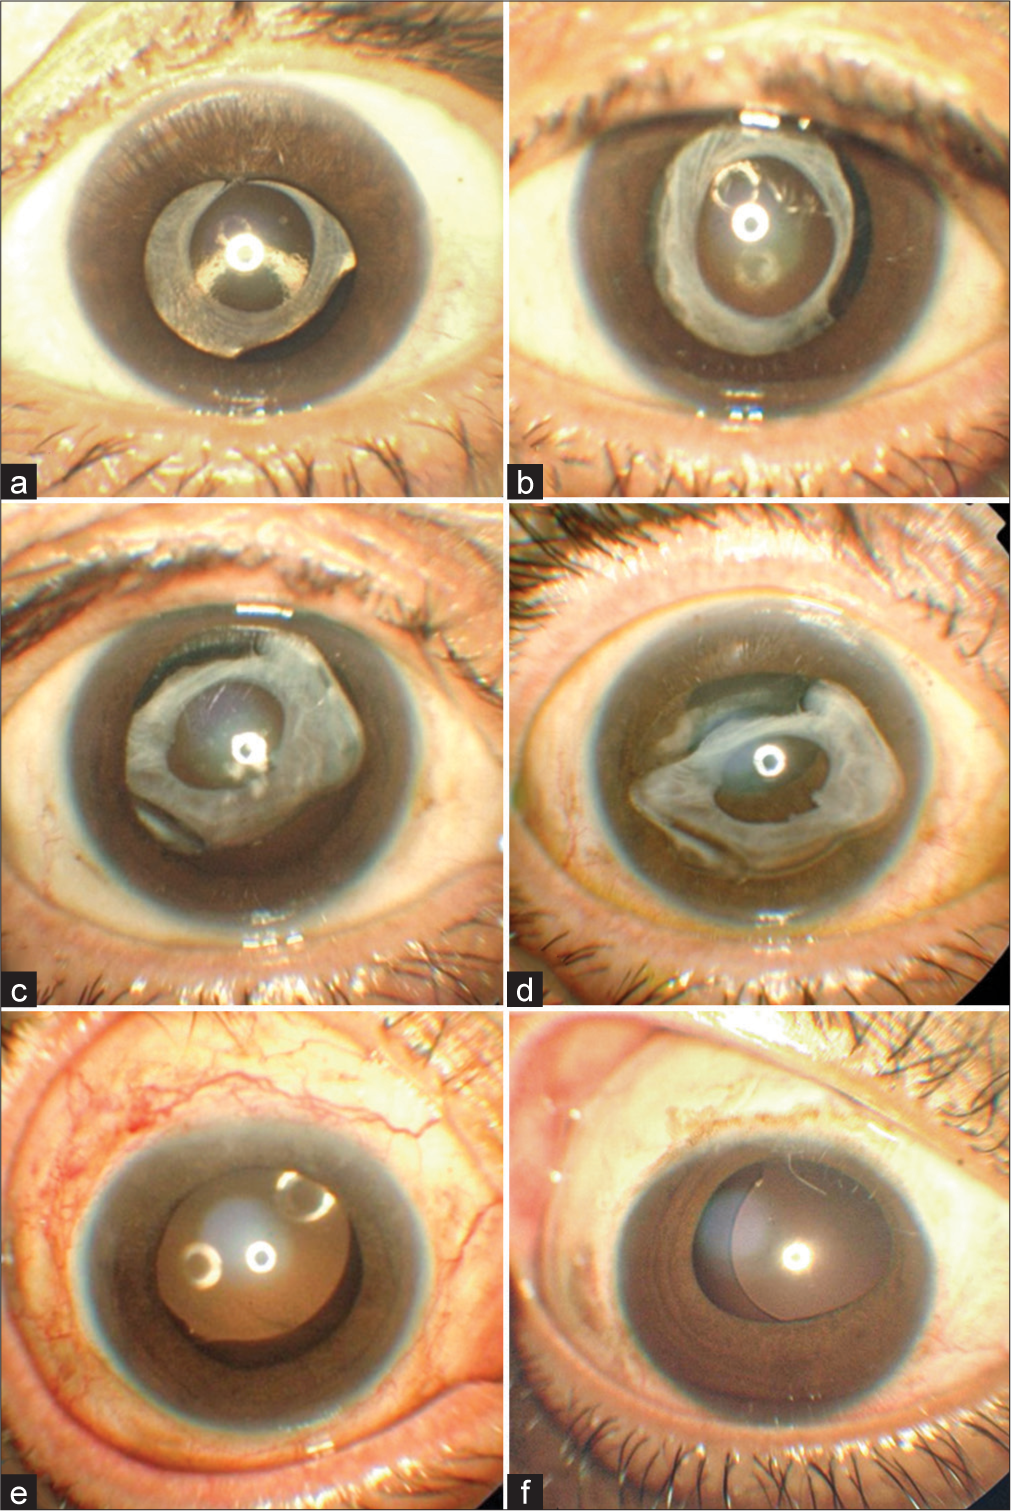 Bilateral spontaneous late anterior dislocation of in-the-bag intraocular lens with phimosis in uveitis patient